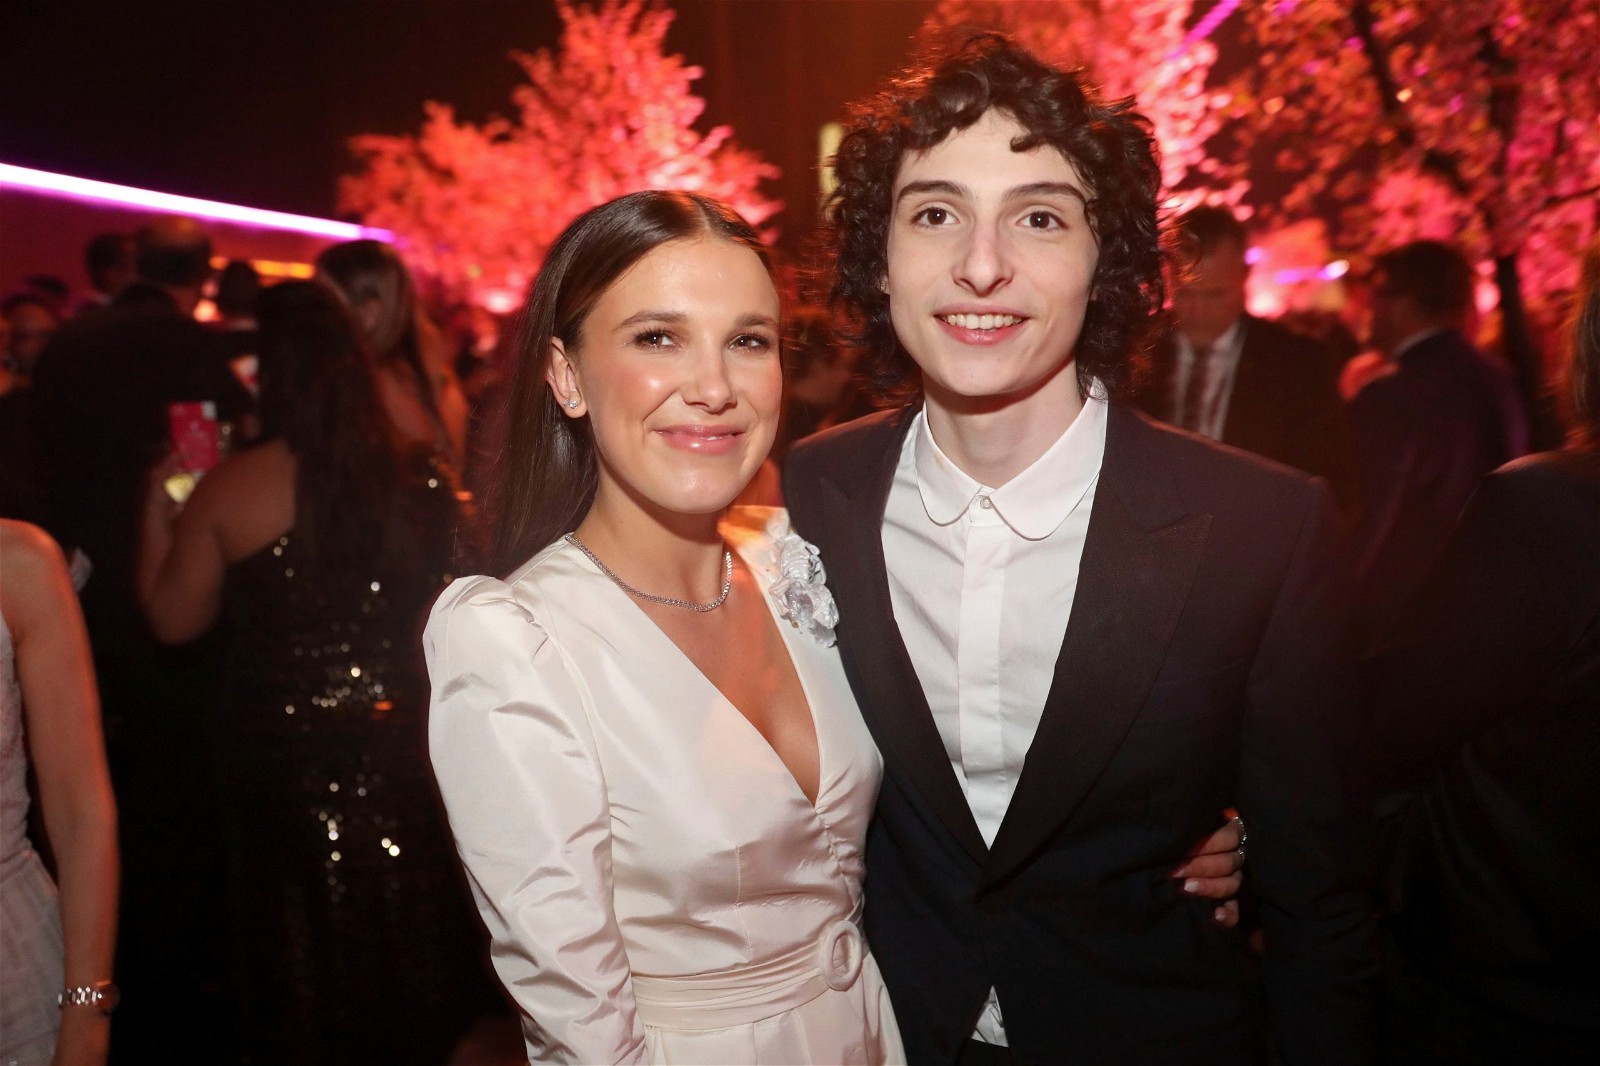 Millie Bobby Brown and Finn Wolfhard